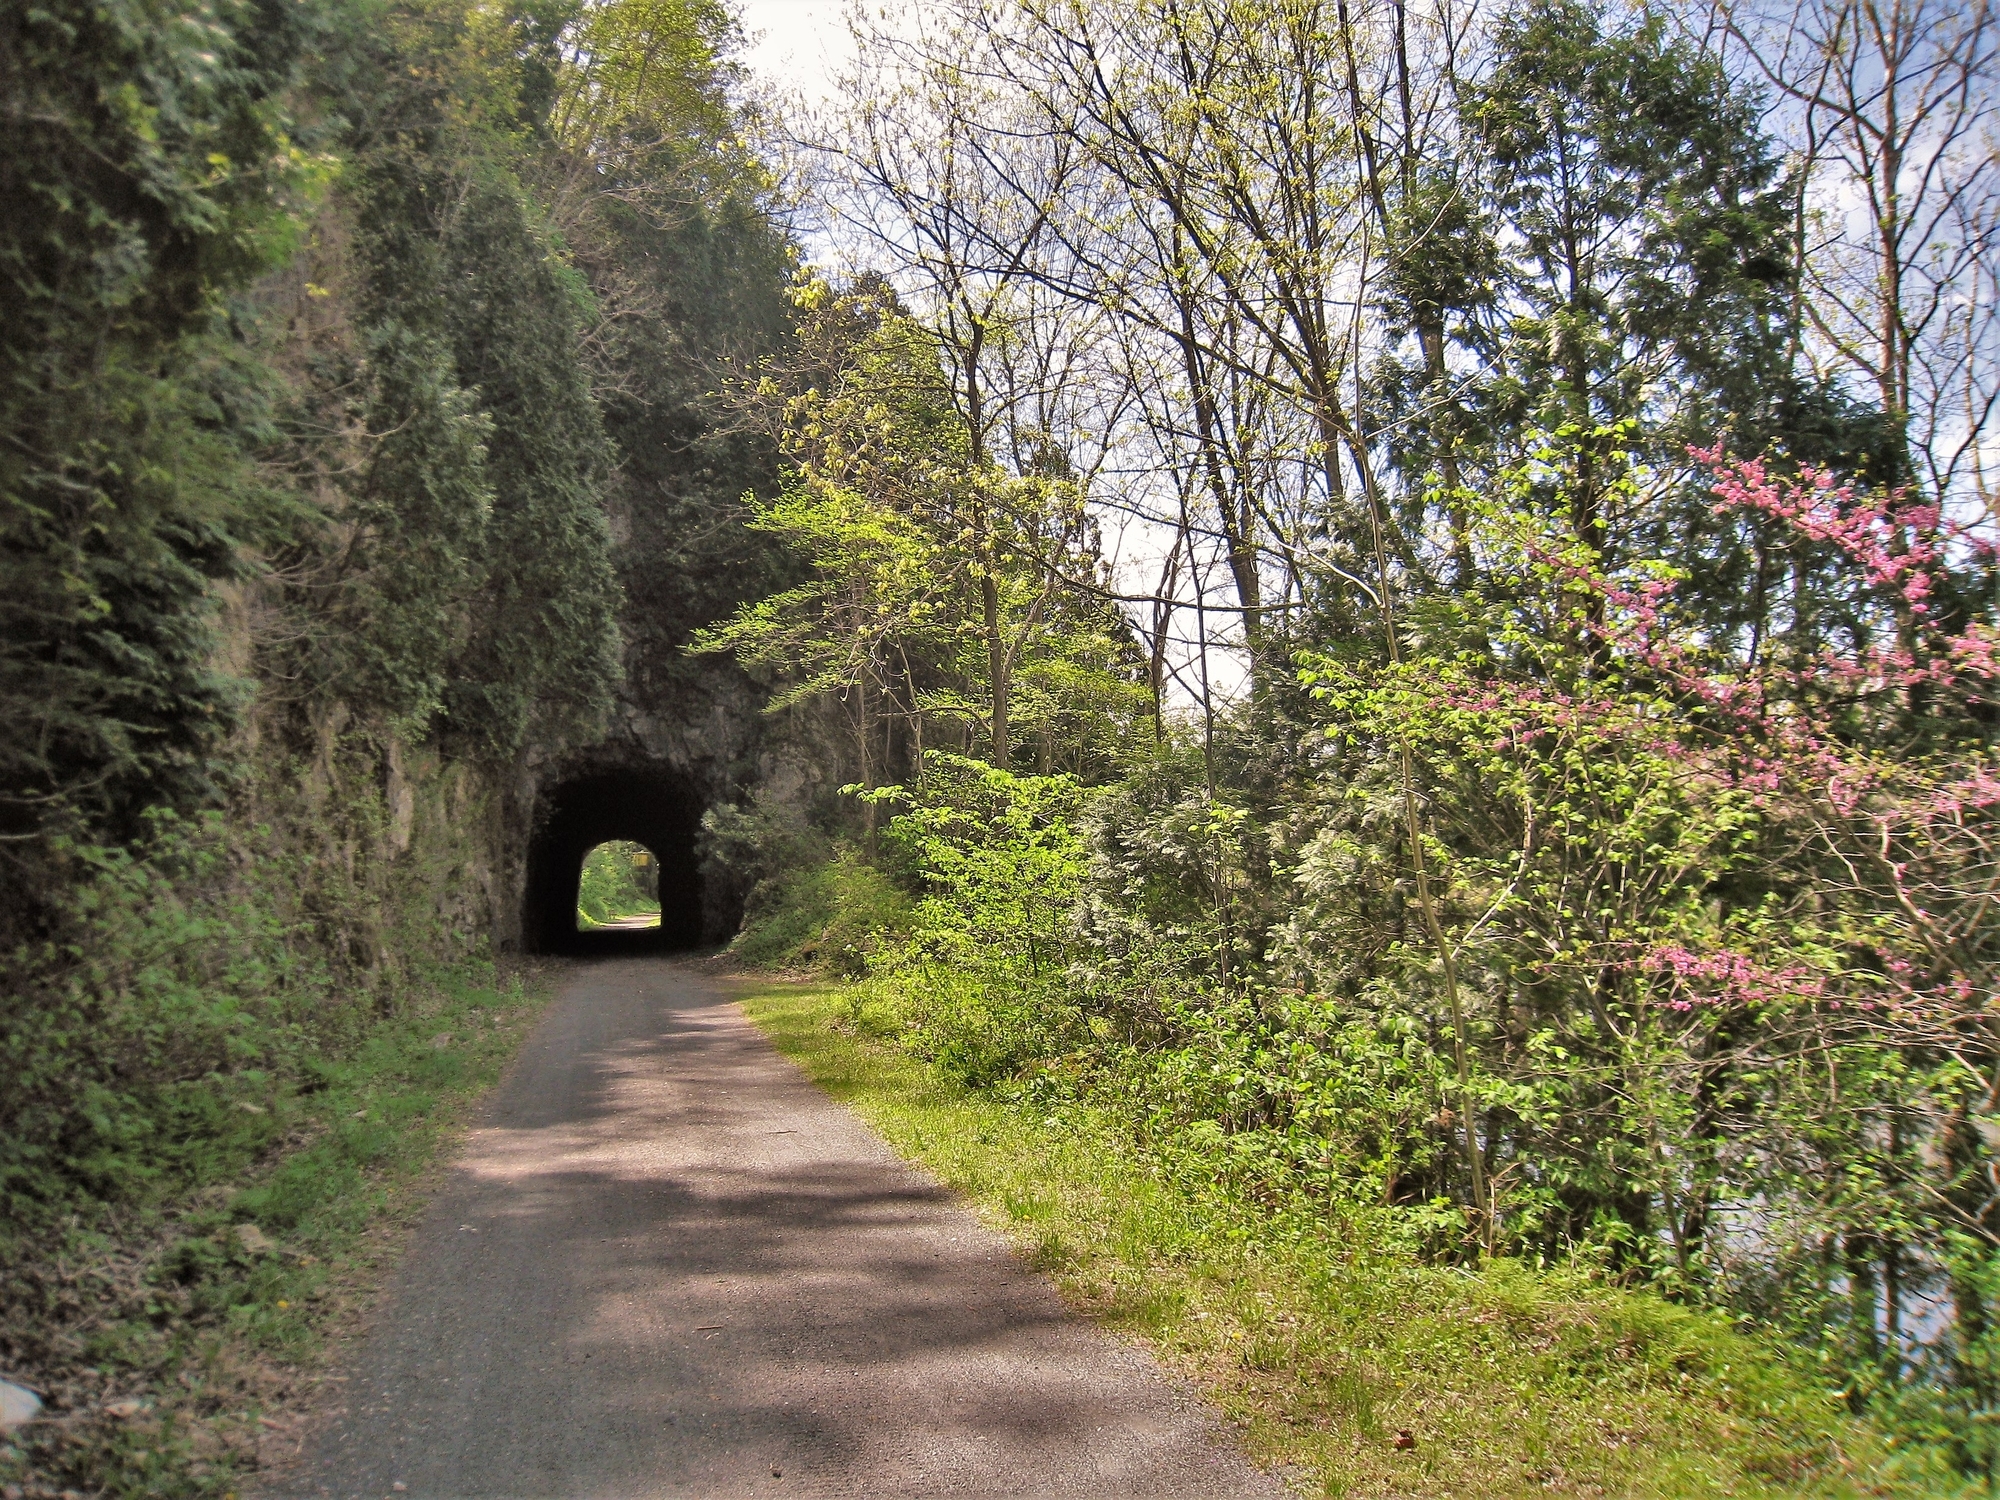 A view of the New River Trail, in Virginia